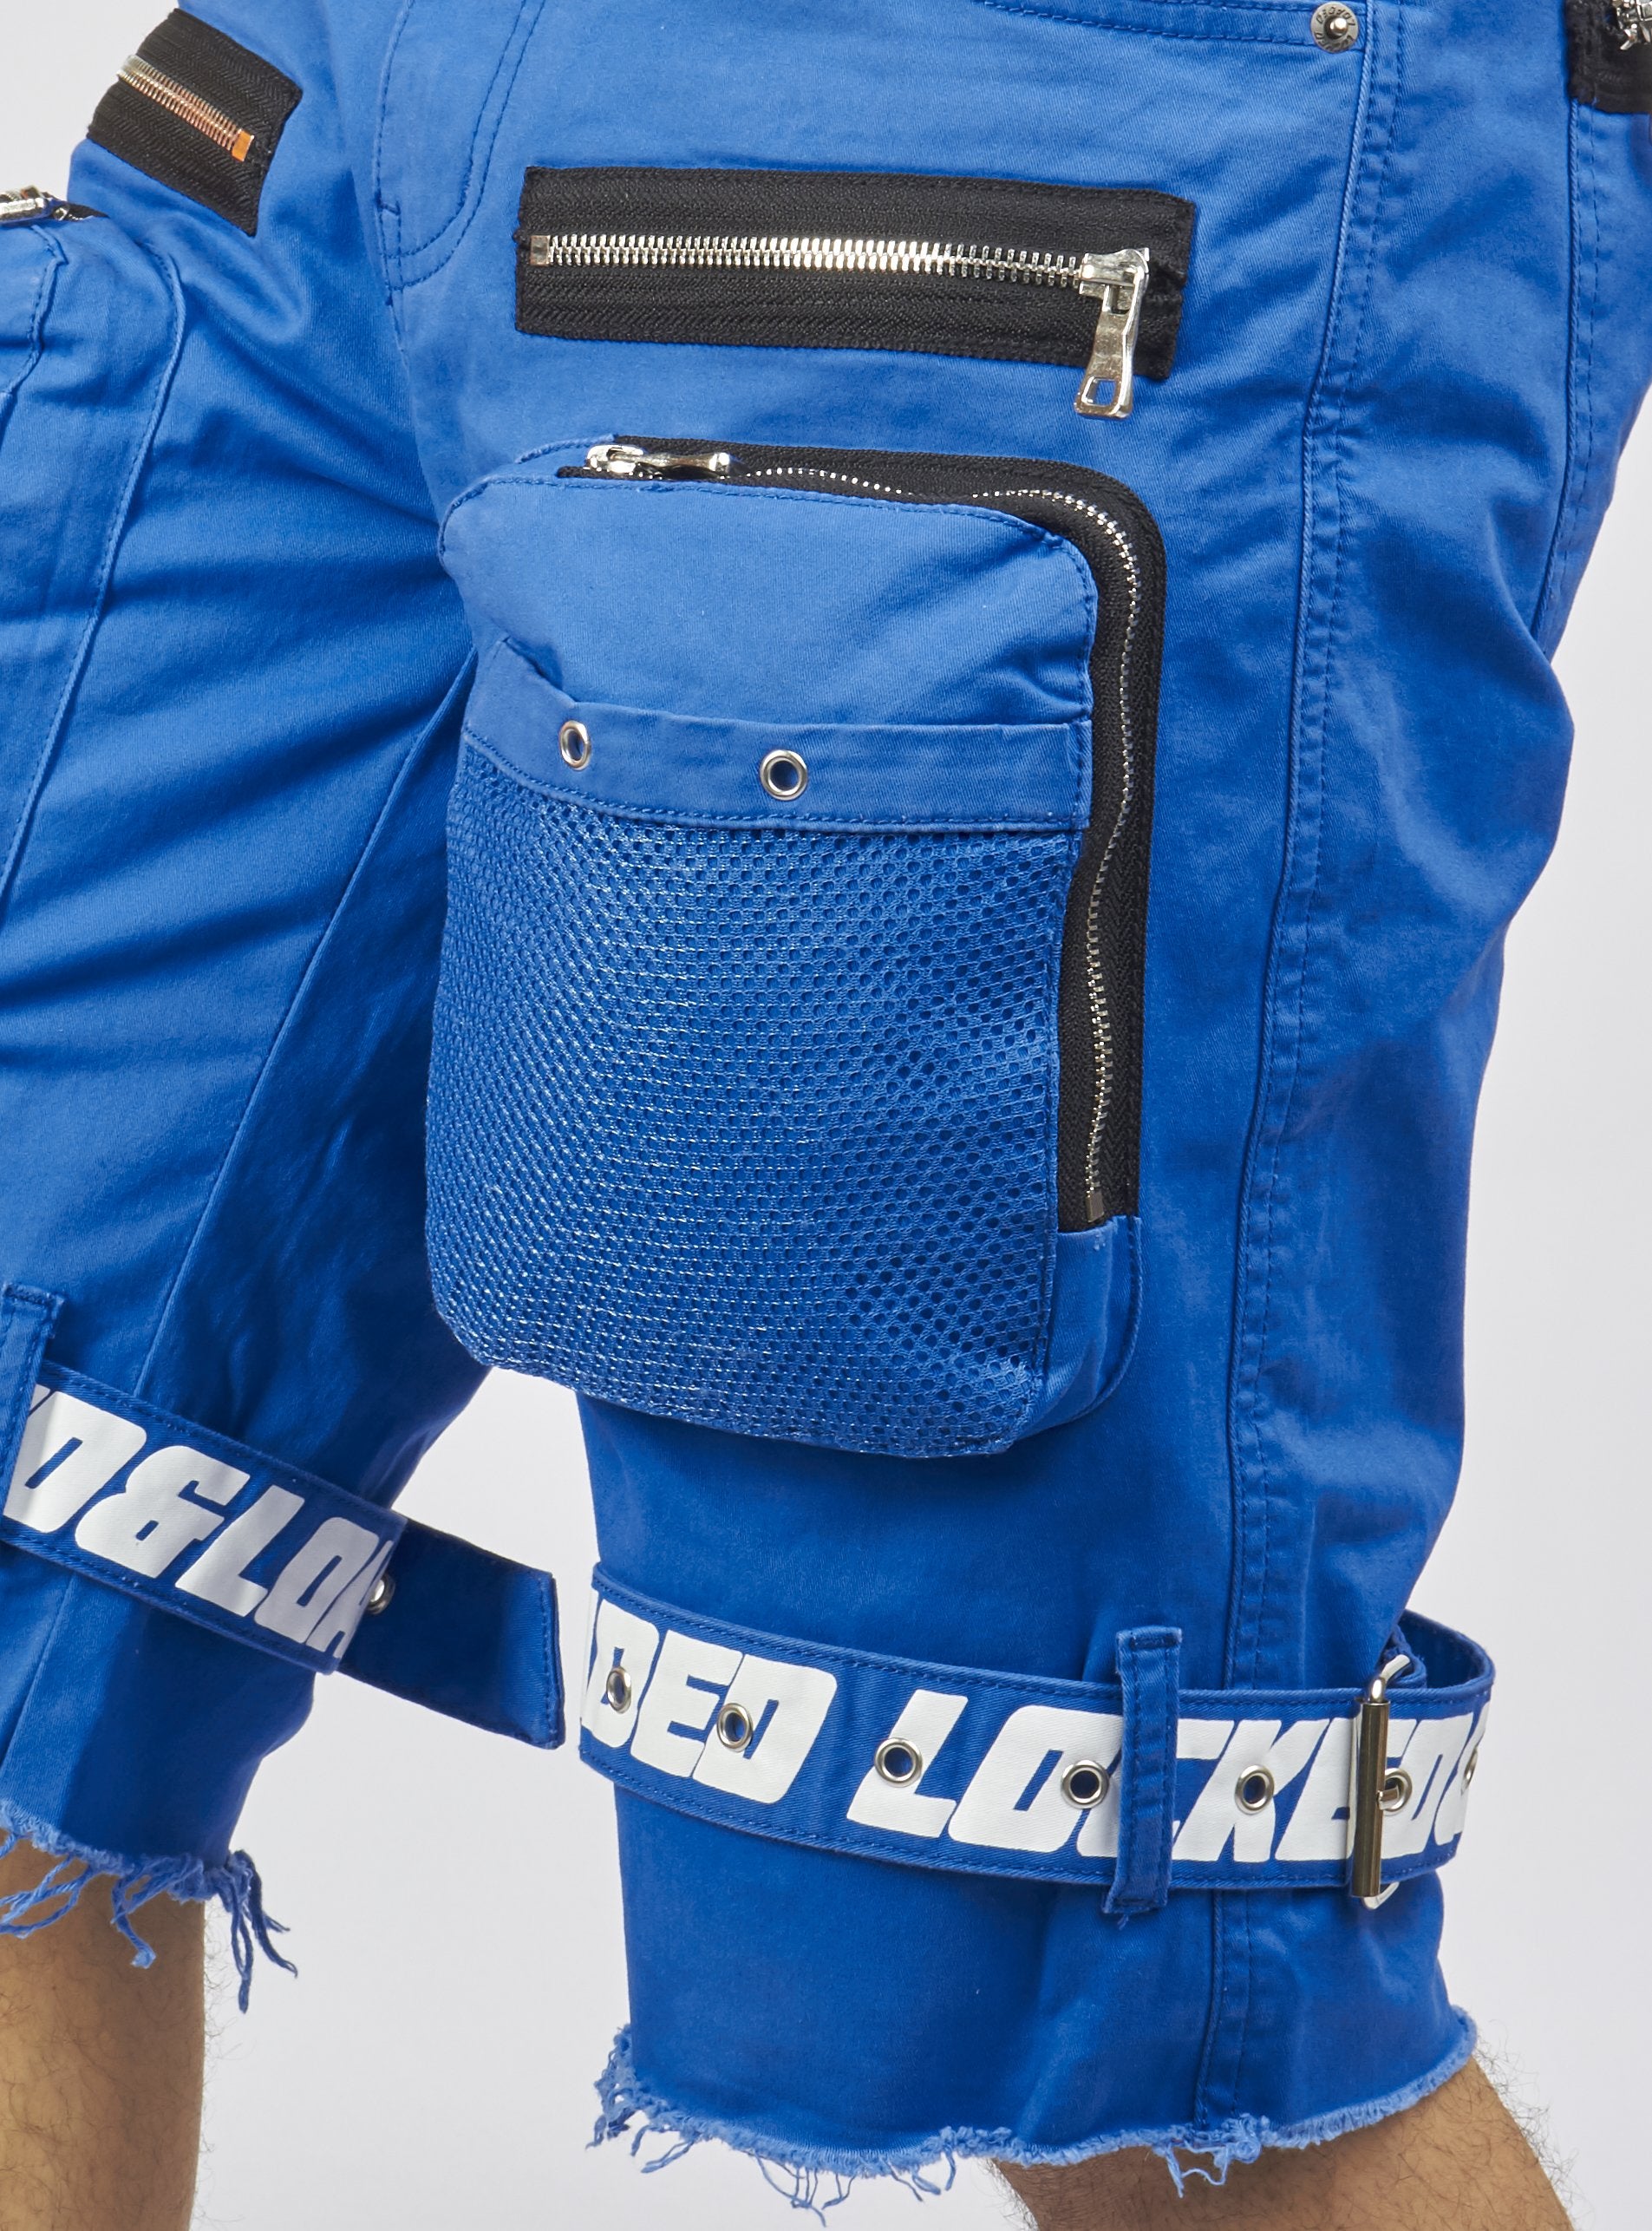 Locked & Loaded Shorts - Royal Blue Cotton Twill - Featuring 3D Cargo Pockets - Blue / White Print - LDS421102